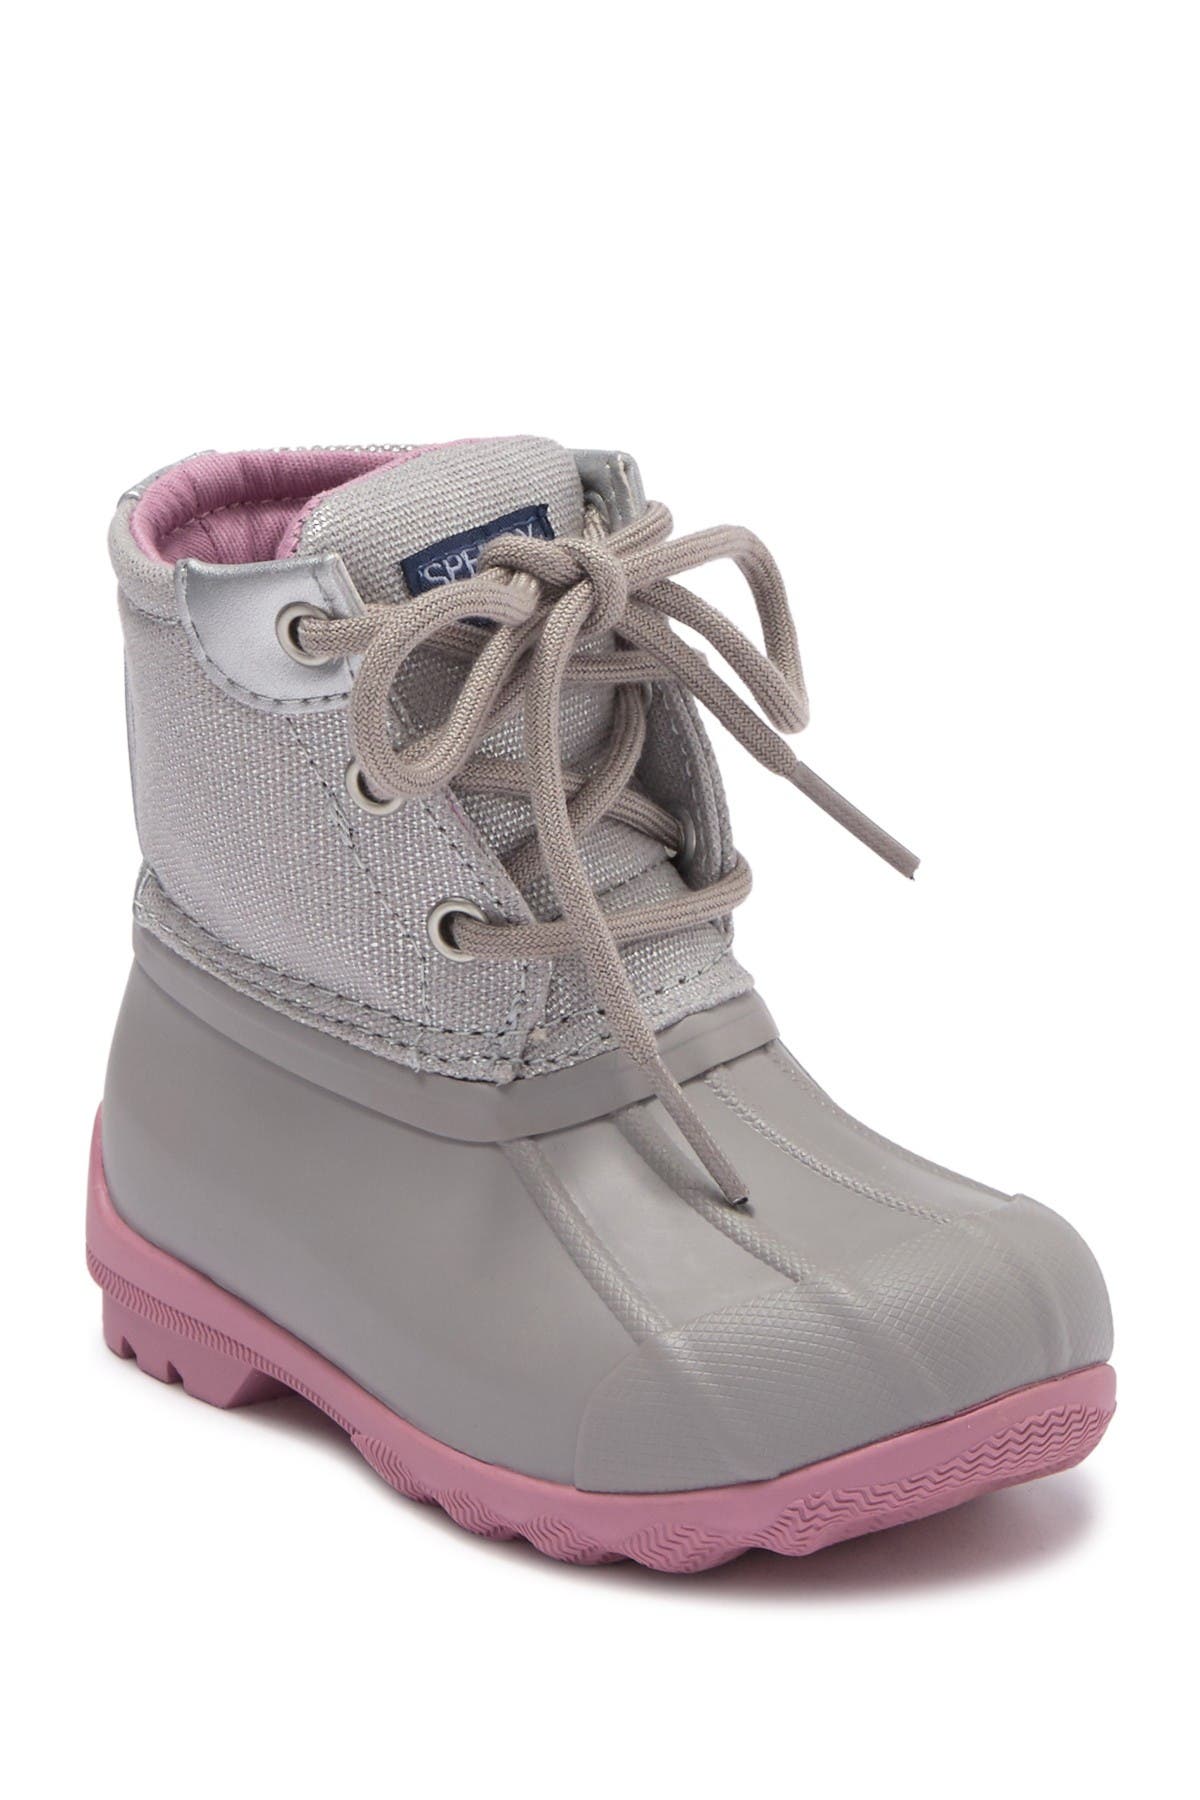 sperry baby girl shoes